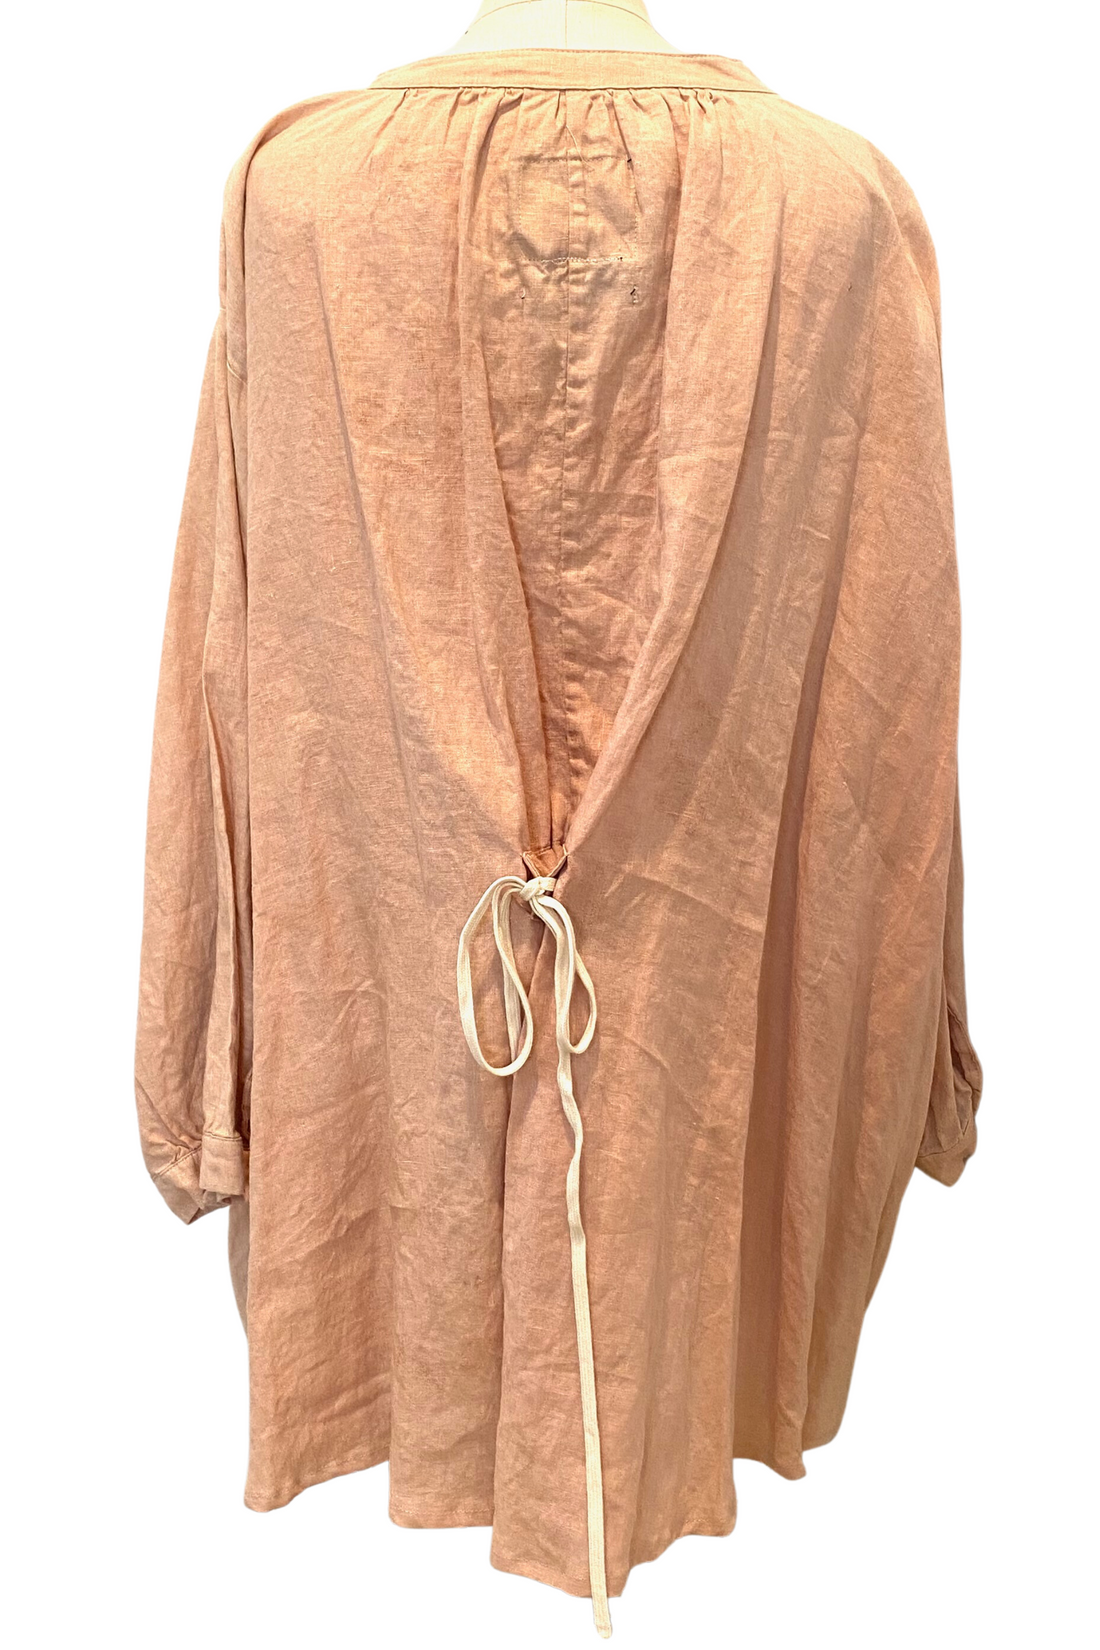 Botanically Dyed Linen Tunic in Peach